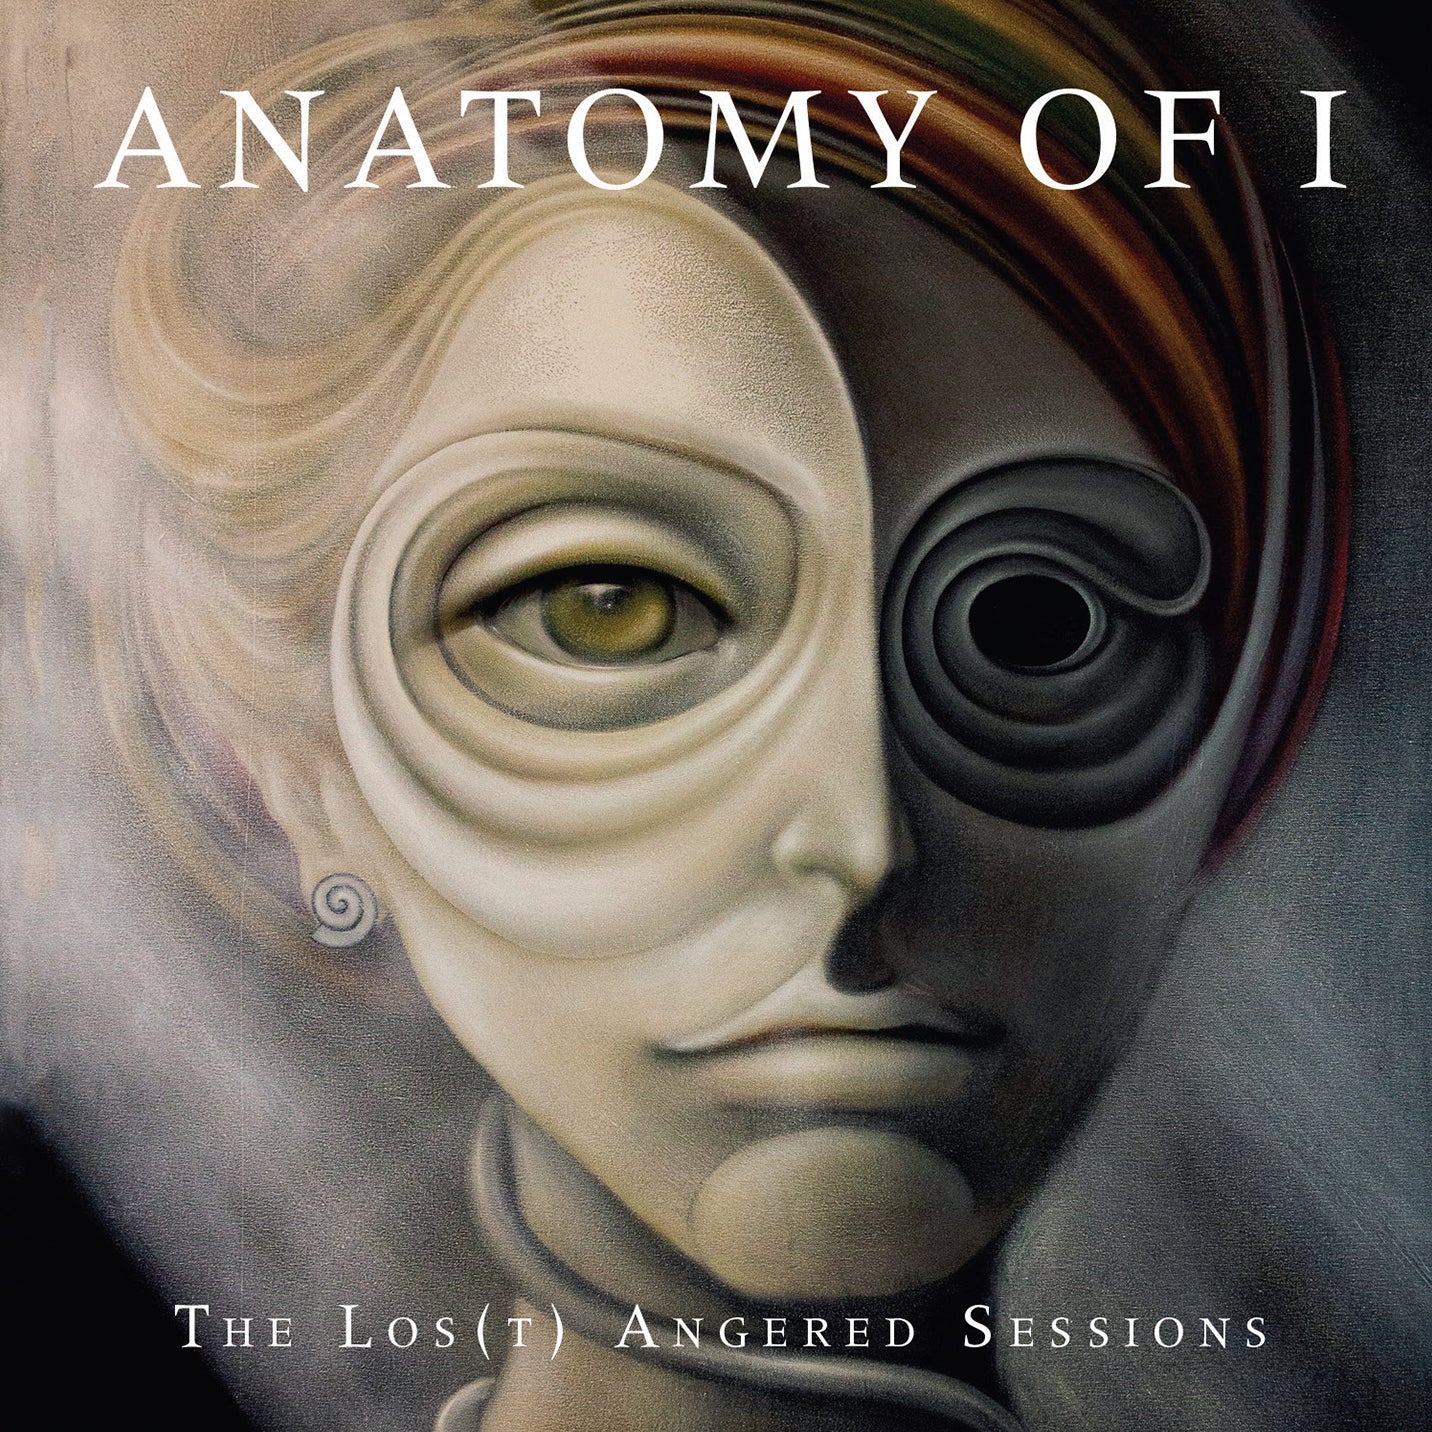 Anatomy Of I "The Los(t) Angered Sessions" Digital album